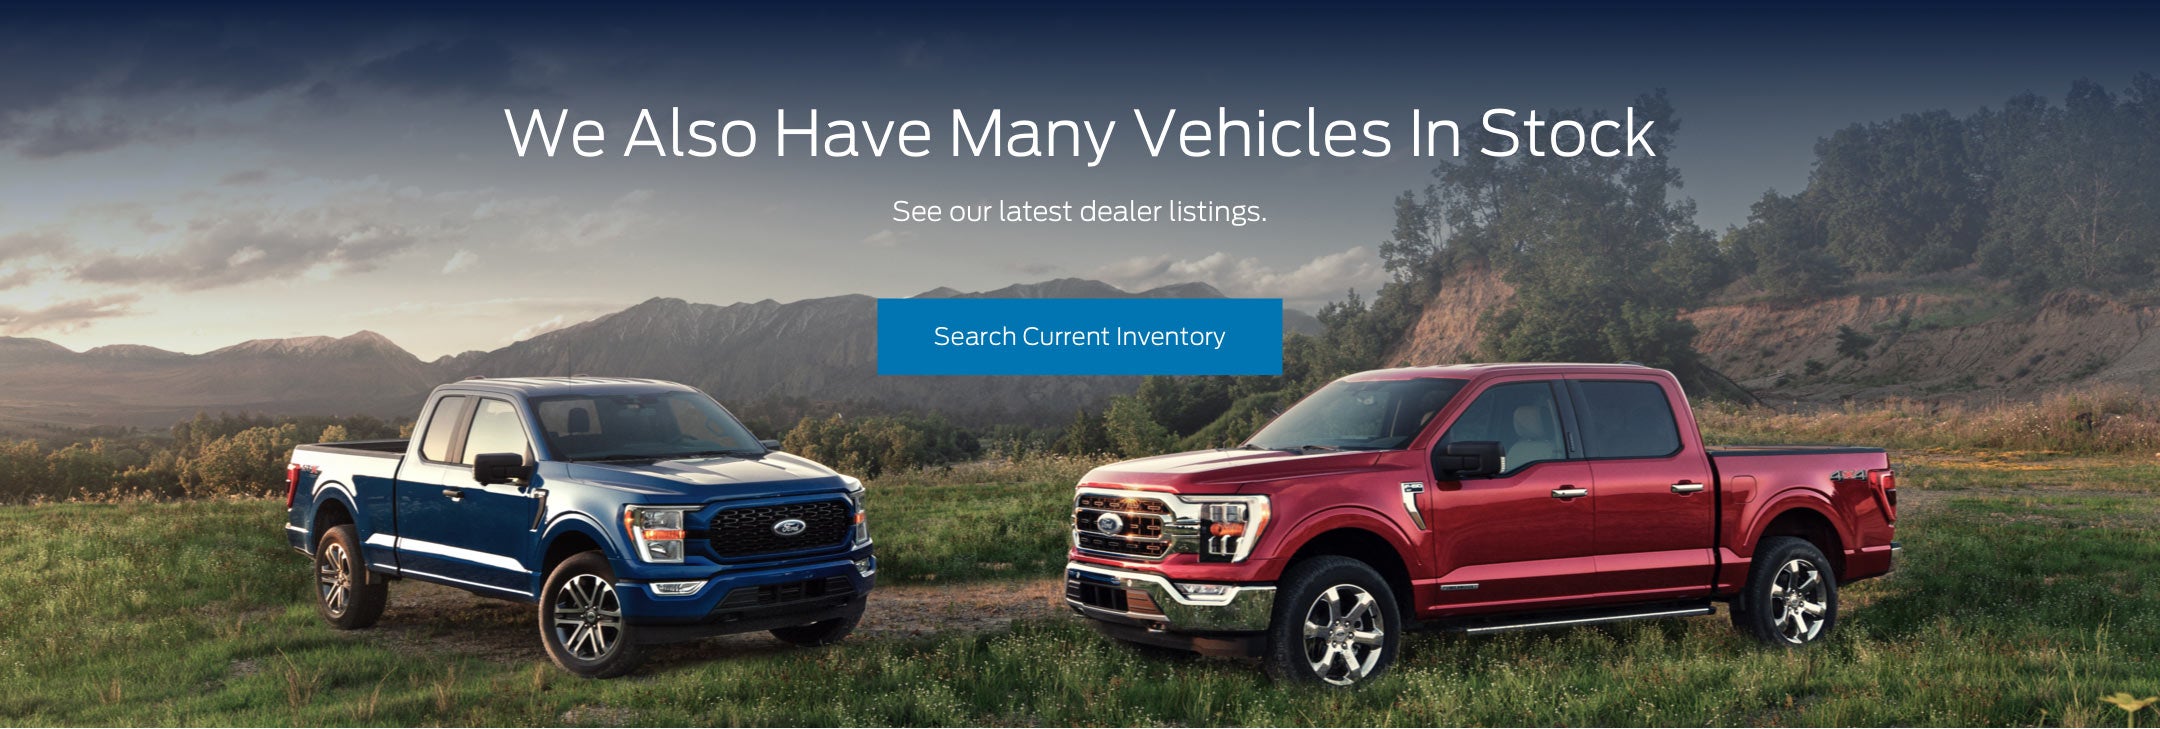 Ford vehicles in stock | Brad Deery Ford in Maquoketa IA